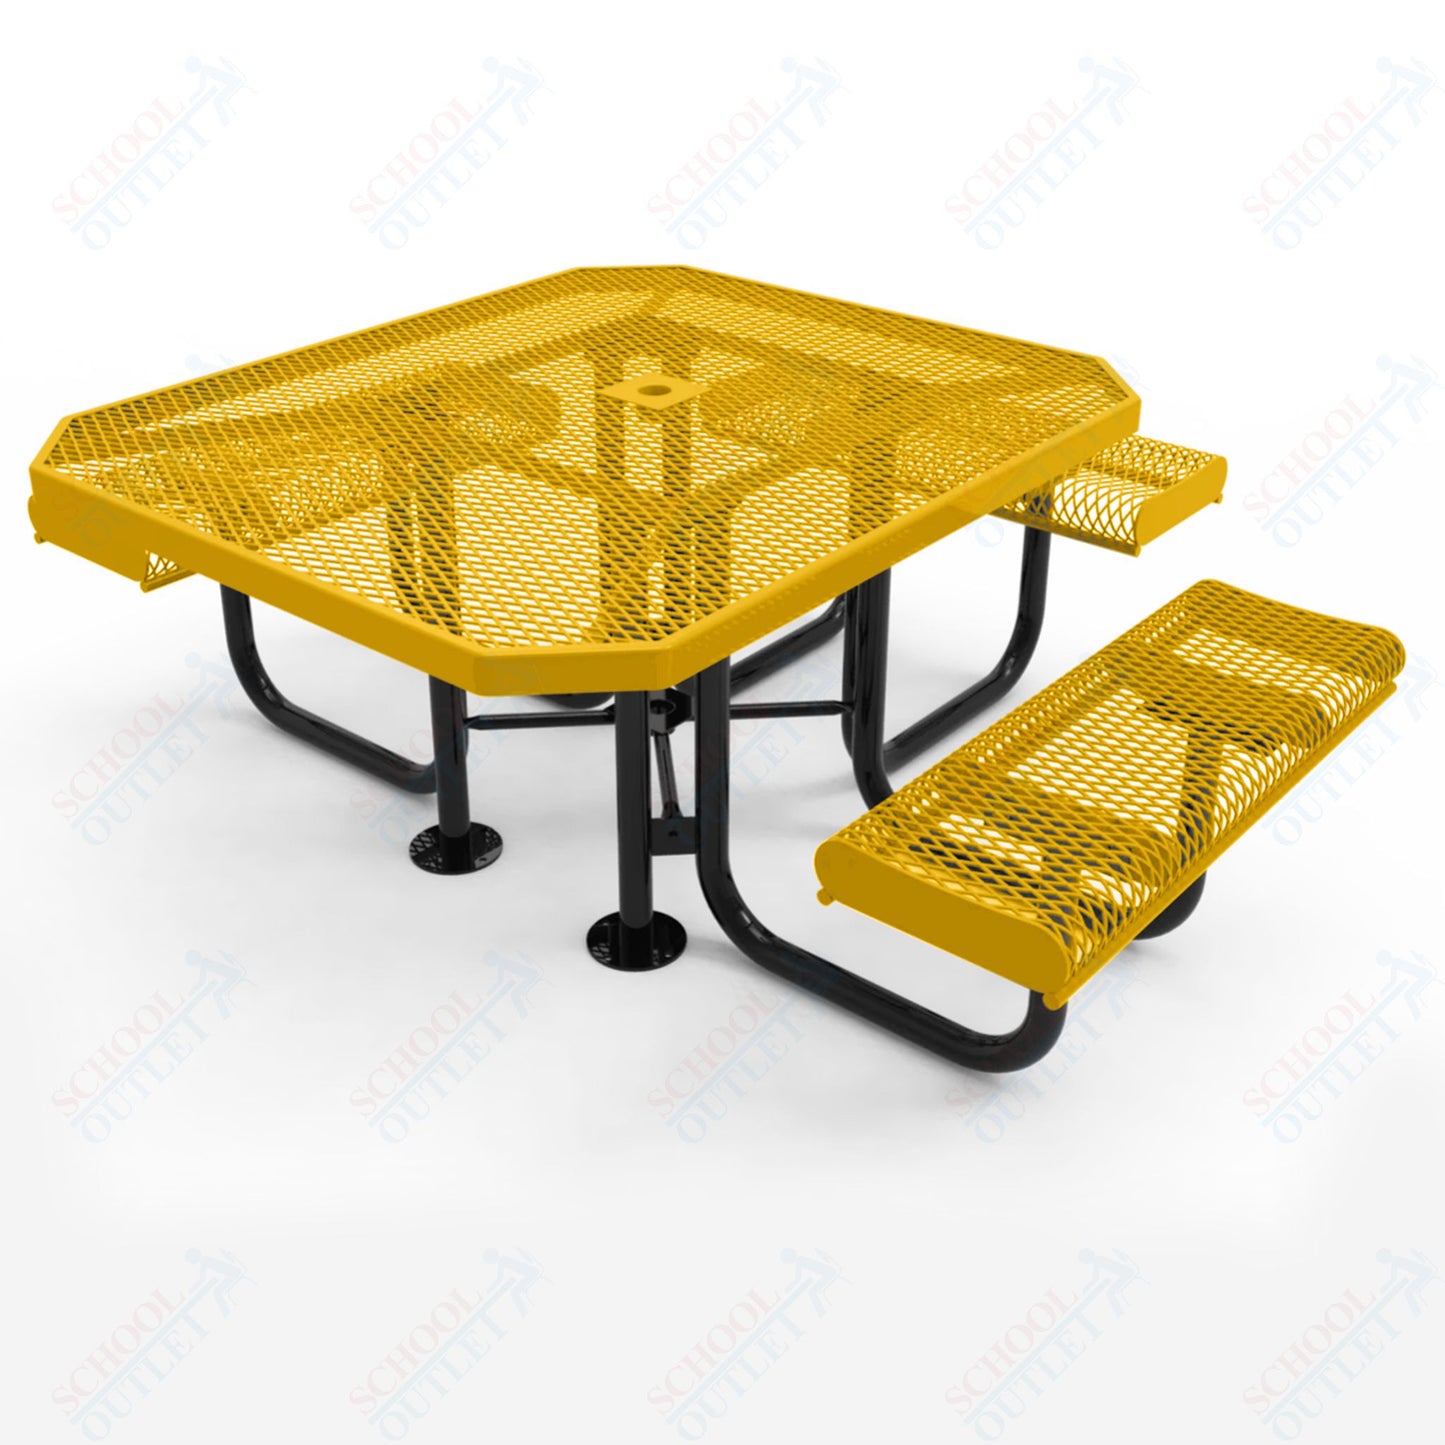 MyTcoat MYT-TOR46 46″ Octagon Portable Picnic Table with Rolled Edges, 3 Seat and ADA Accessible (80"W x 71"D x 30"H)